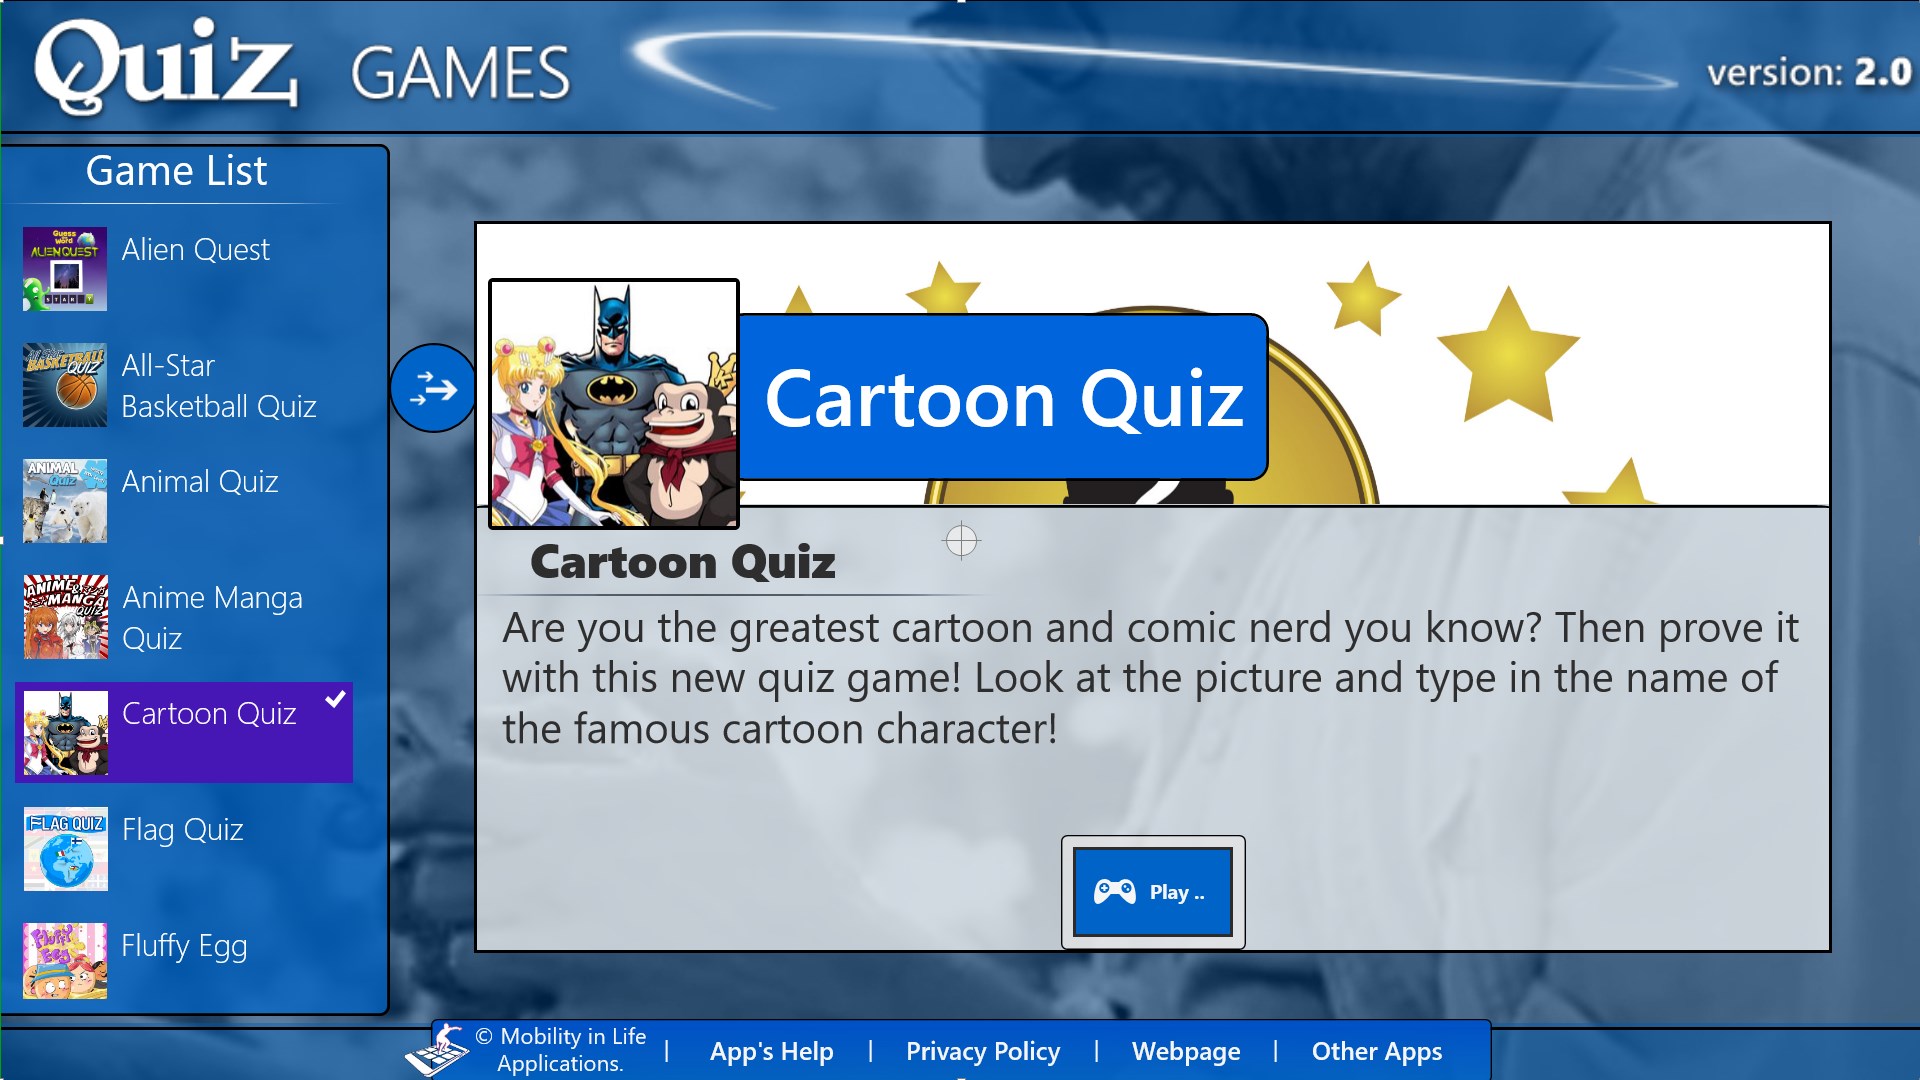 FLAGS QUIZ - Play Online for Free!